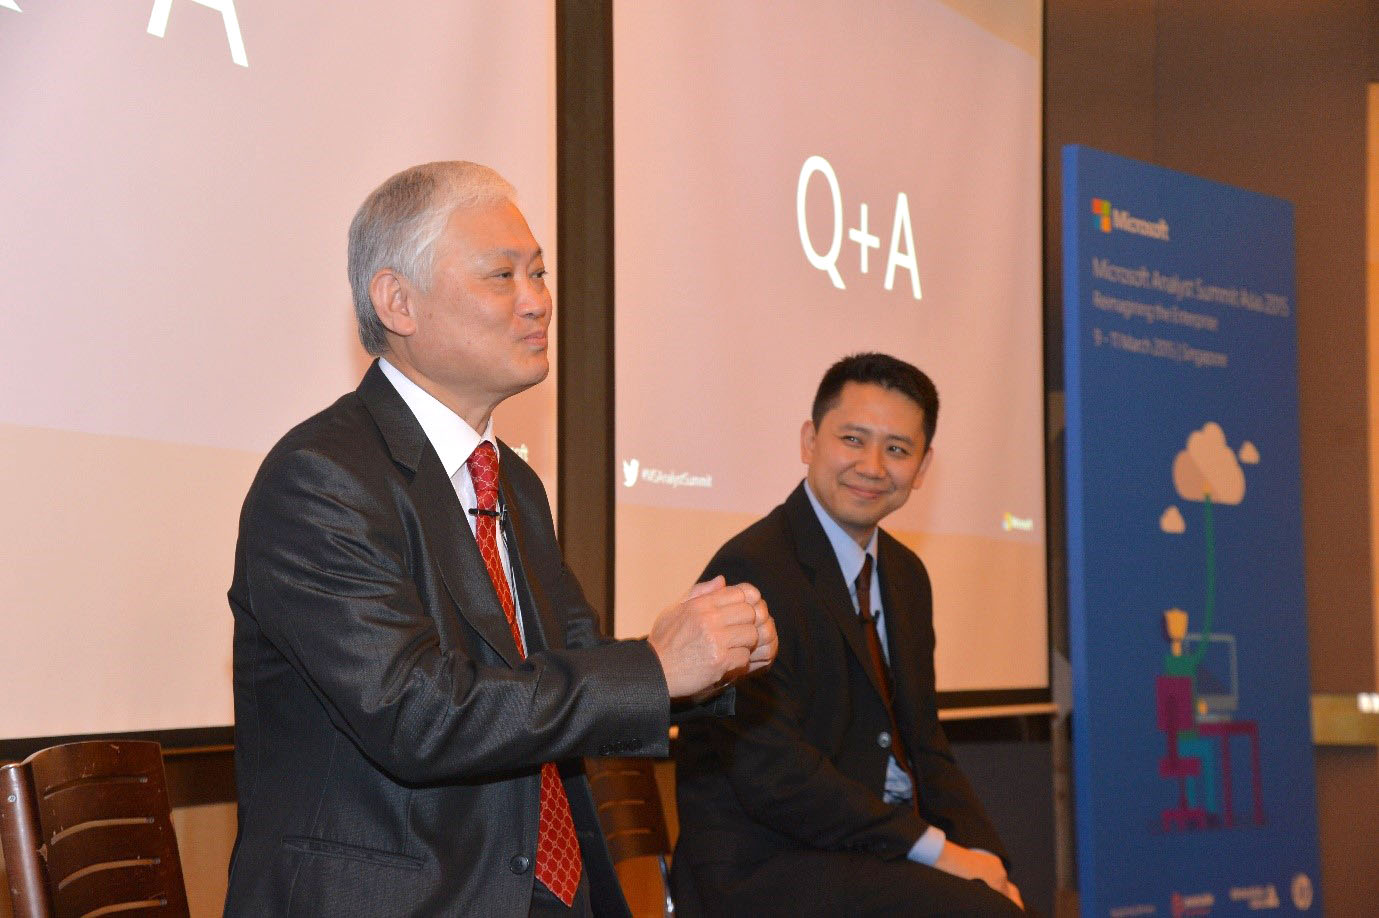 Chaney Ho, President, Advantech (left) and Jerry Lee, Global Group Product Manager, Microsoft (right) both believe that IoT uptake in Asia Pacific will spike from 2015.